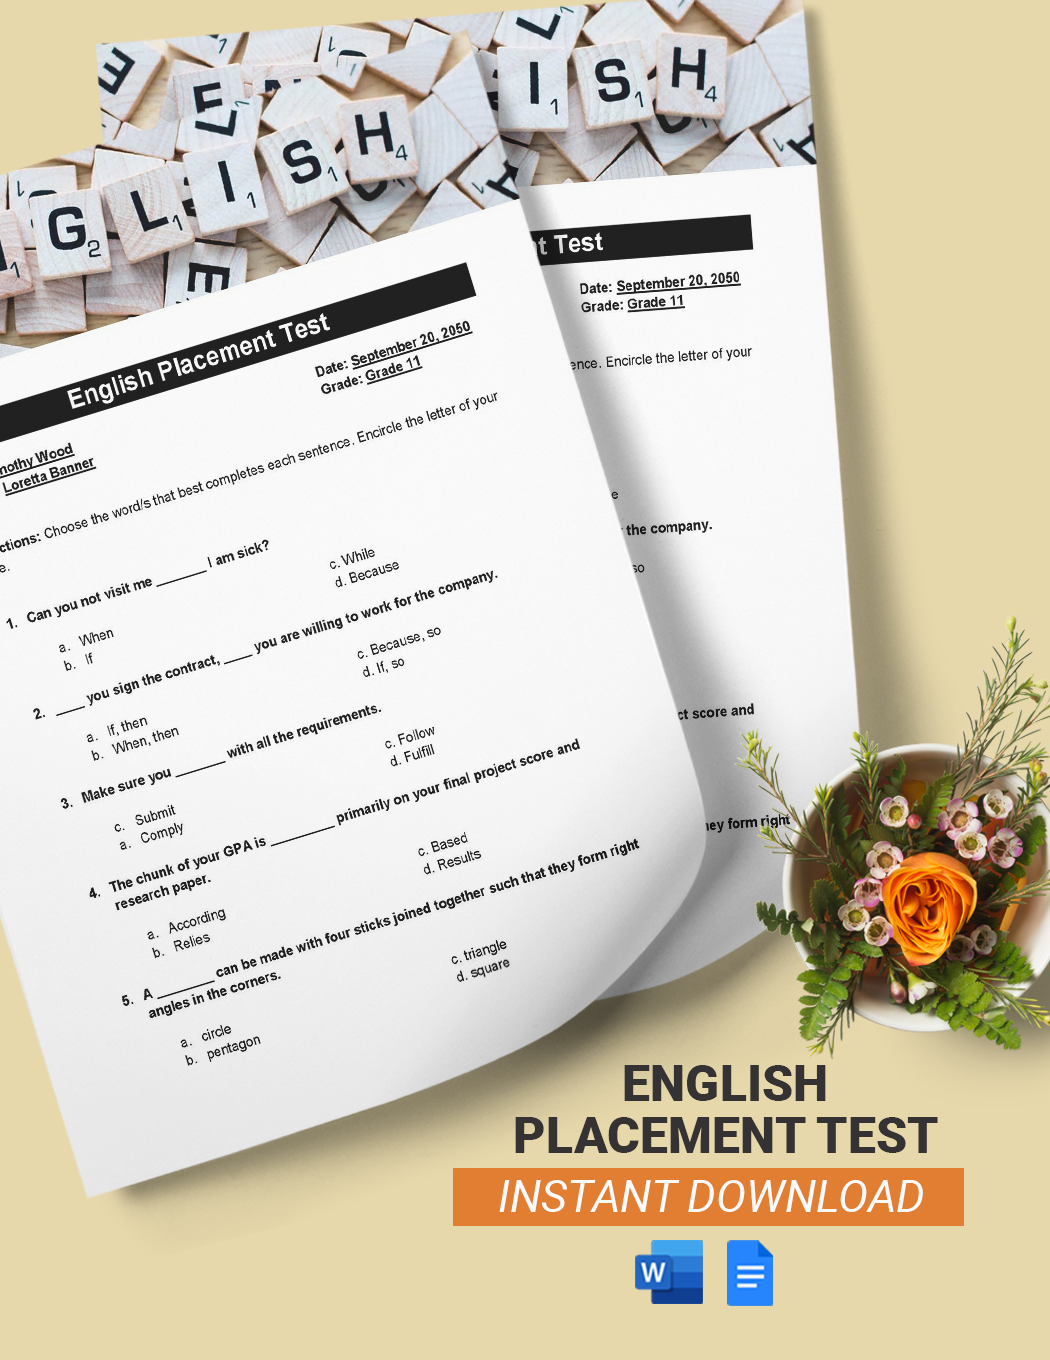 English Placement Test Template in Word, Google Docs